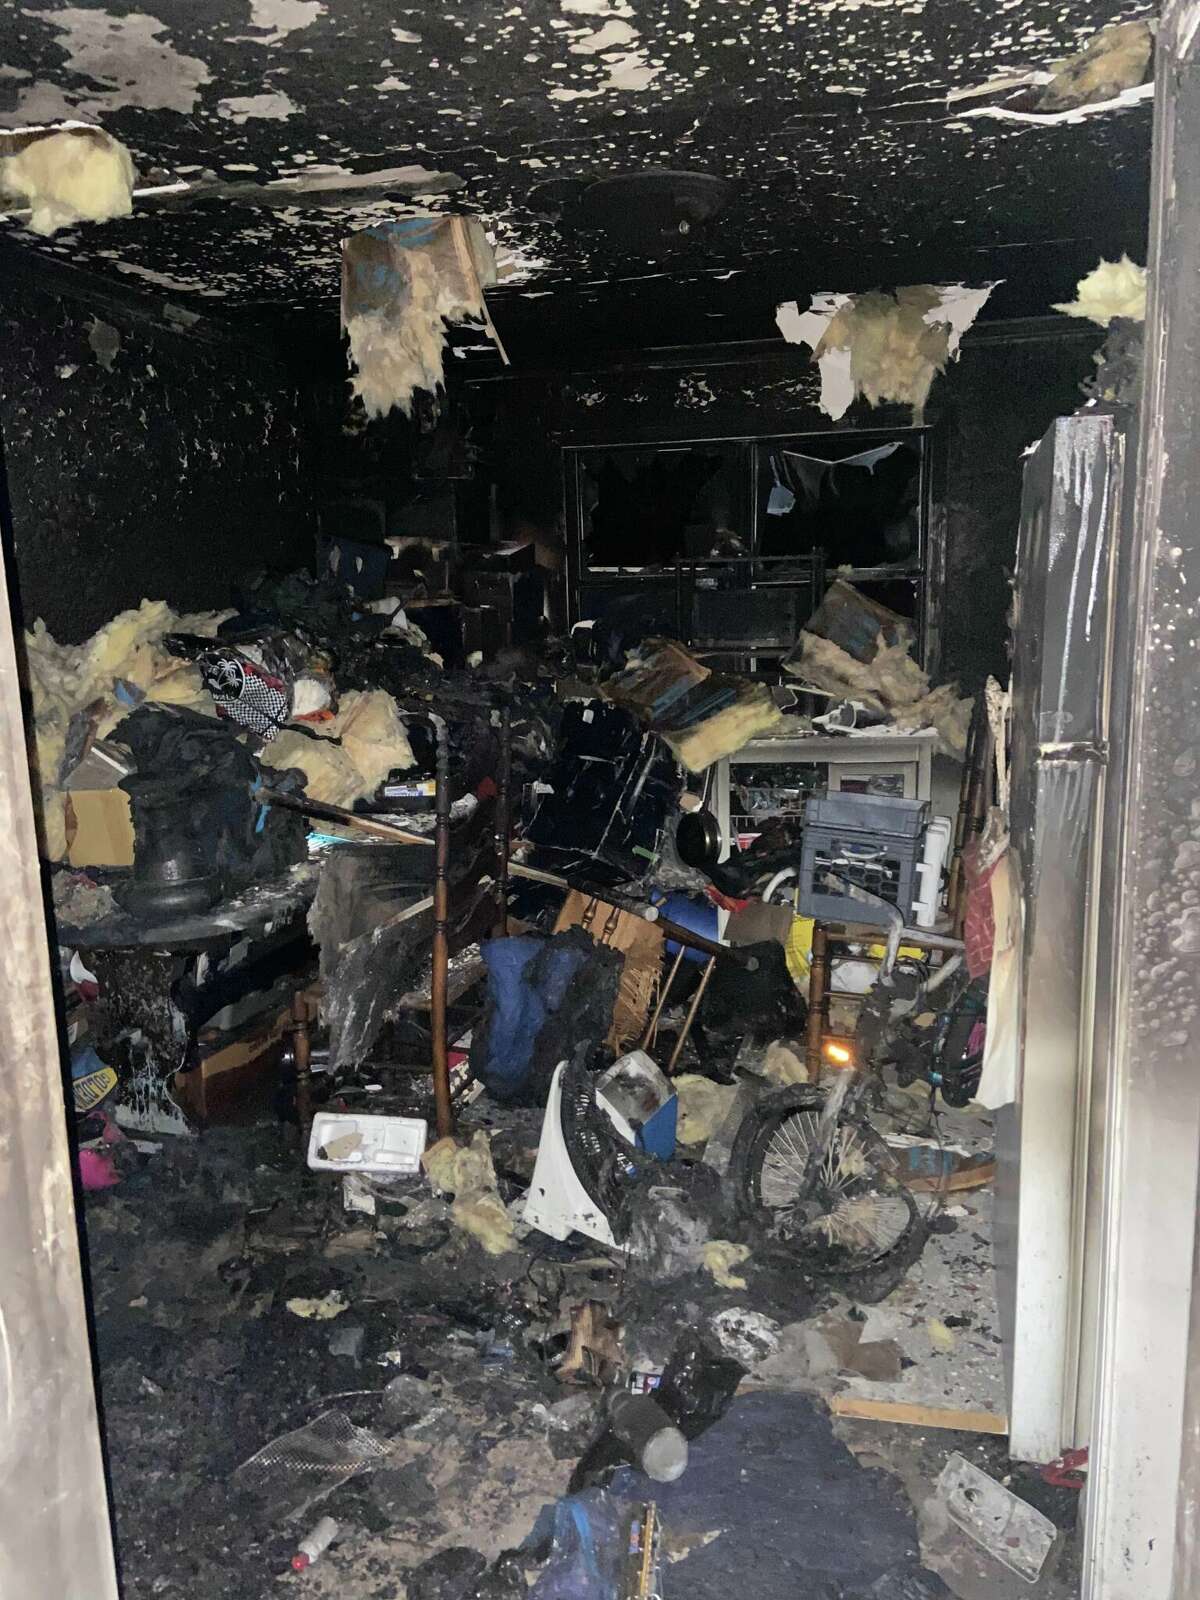 Mickey Than and his daughter Tayla were among the residents affected by the fire that broke out at the apartment complex at 78 Belair Drive on Feb. 16. Photographed here is the Than's one-bedroom apartment in the aftermath of the fire.